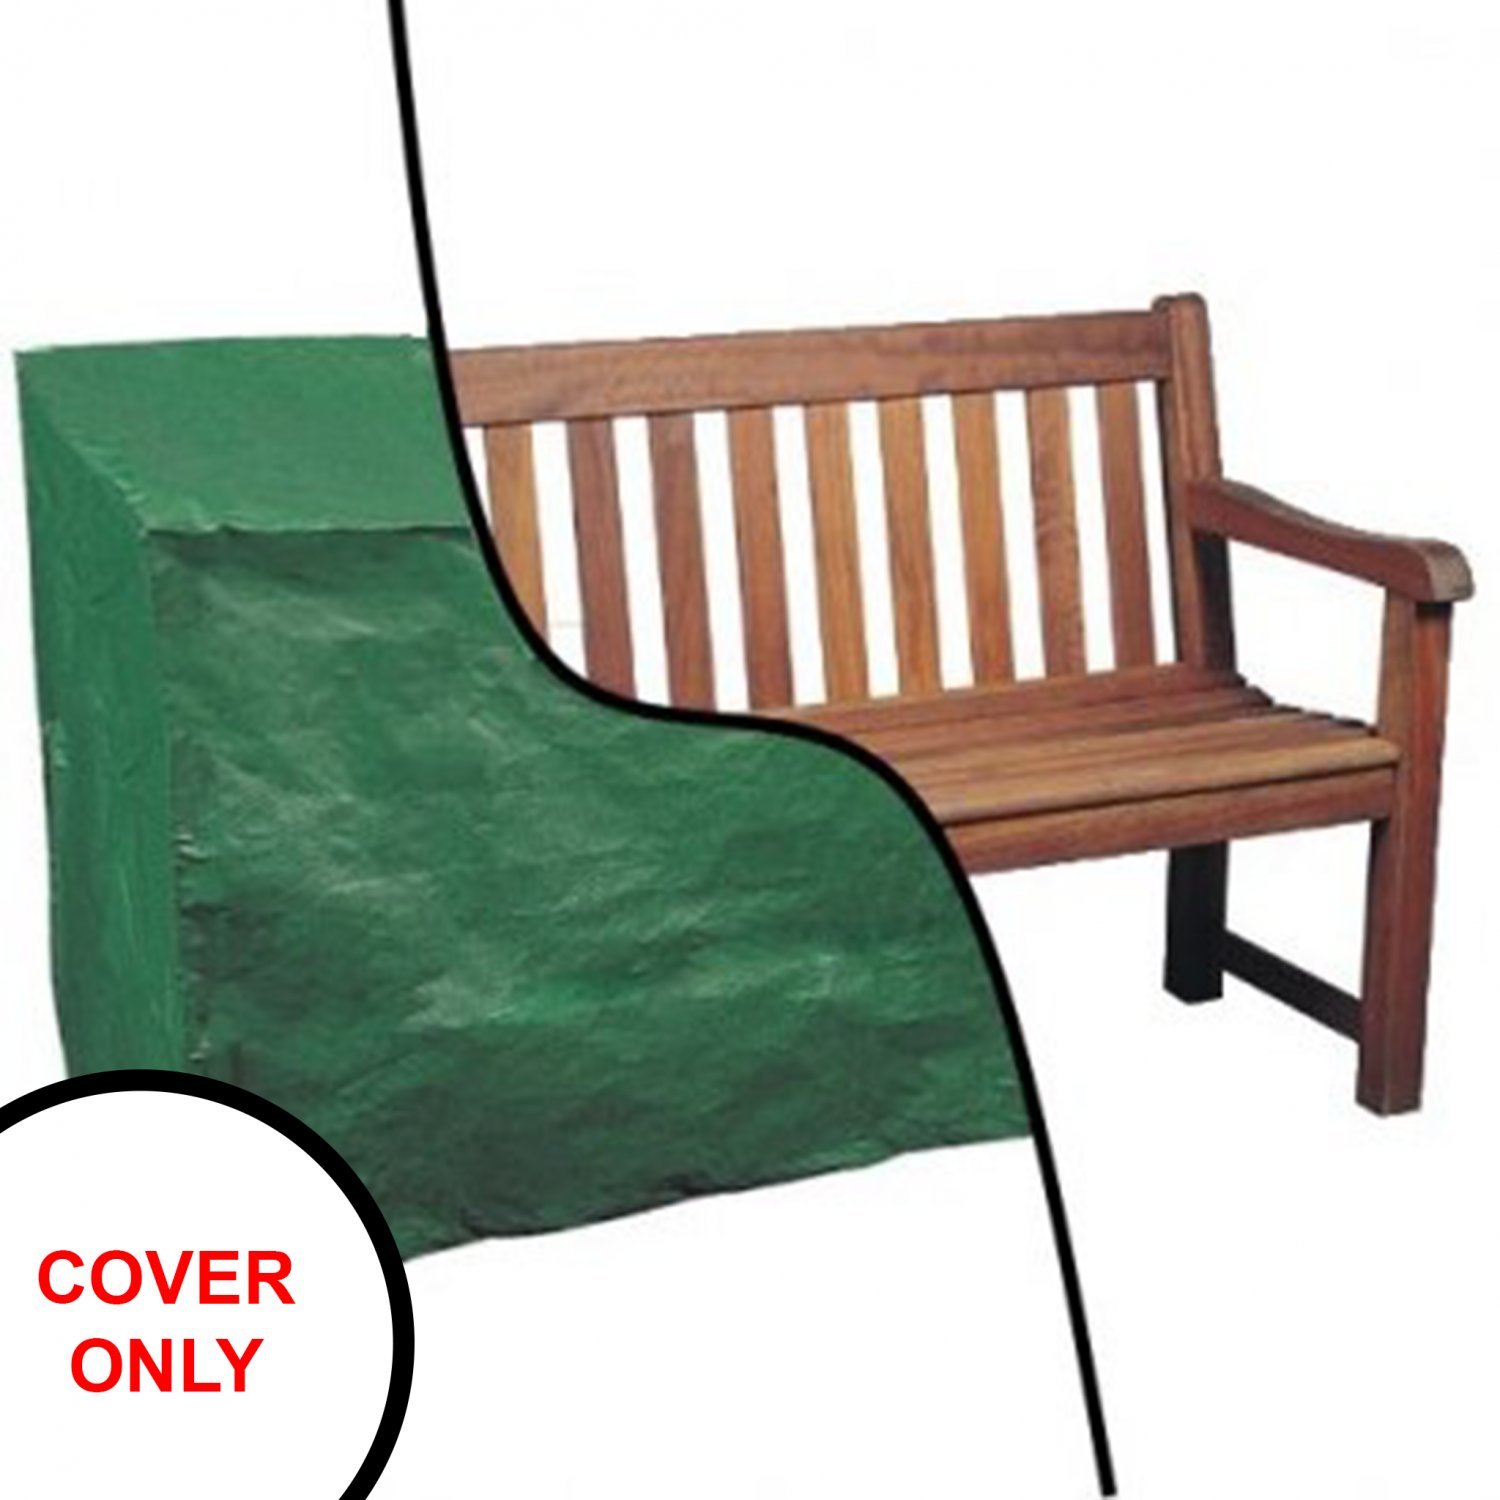 Waterproof 5ft 1.5m Garden Furniture 3 Seater Bench Seat Cover